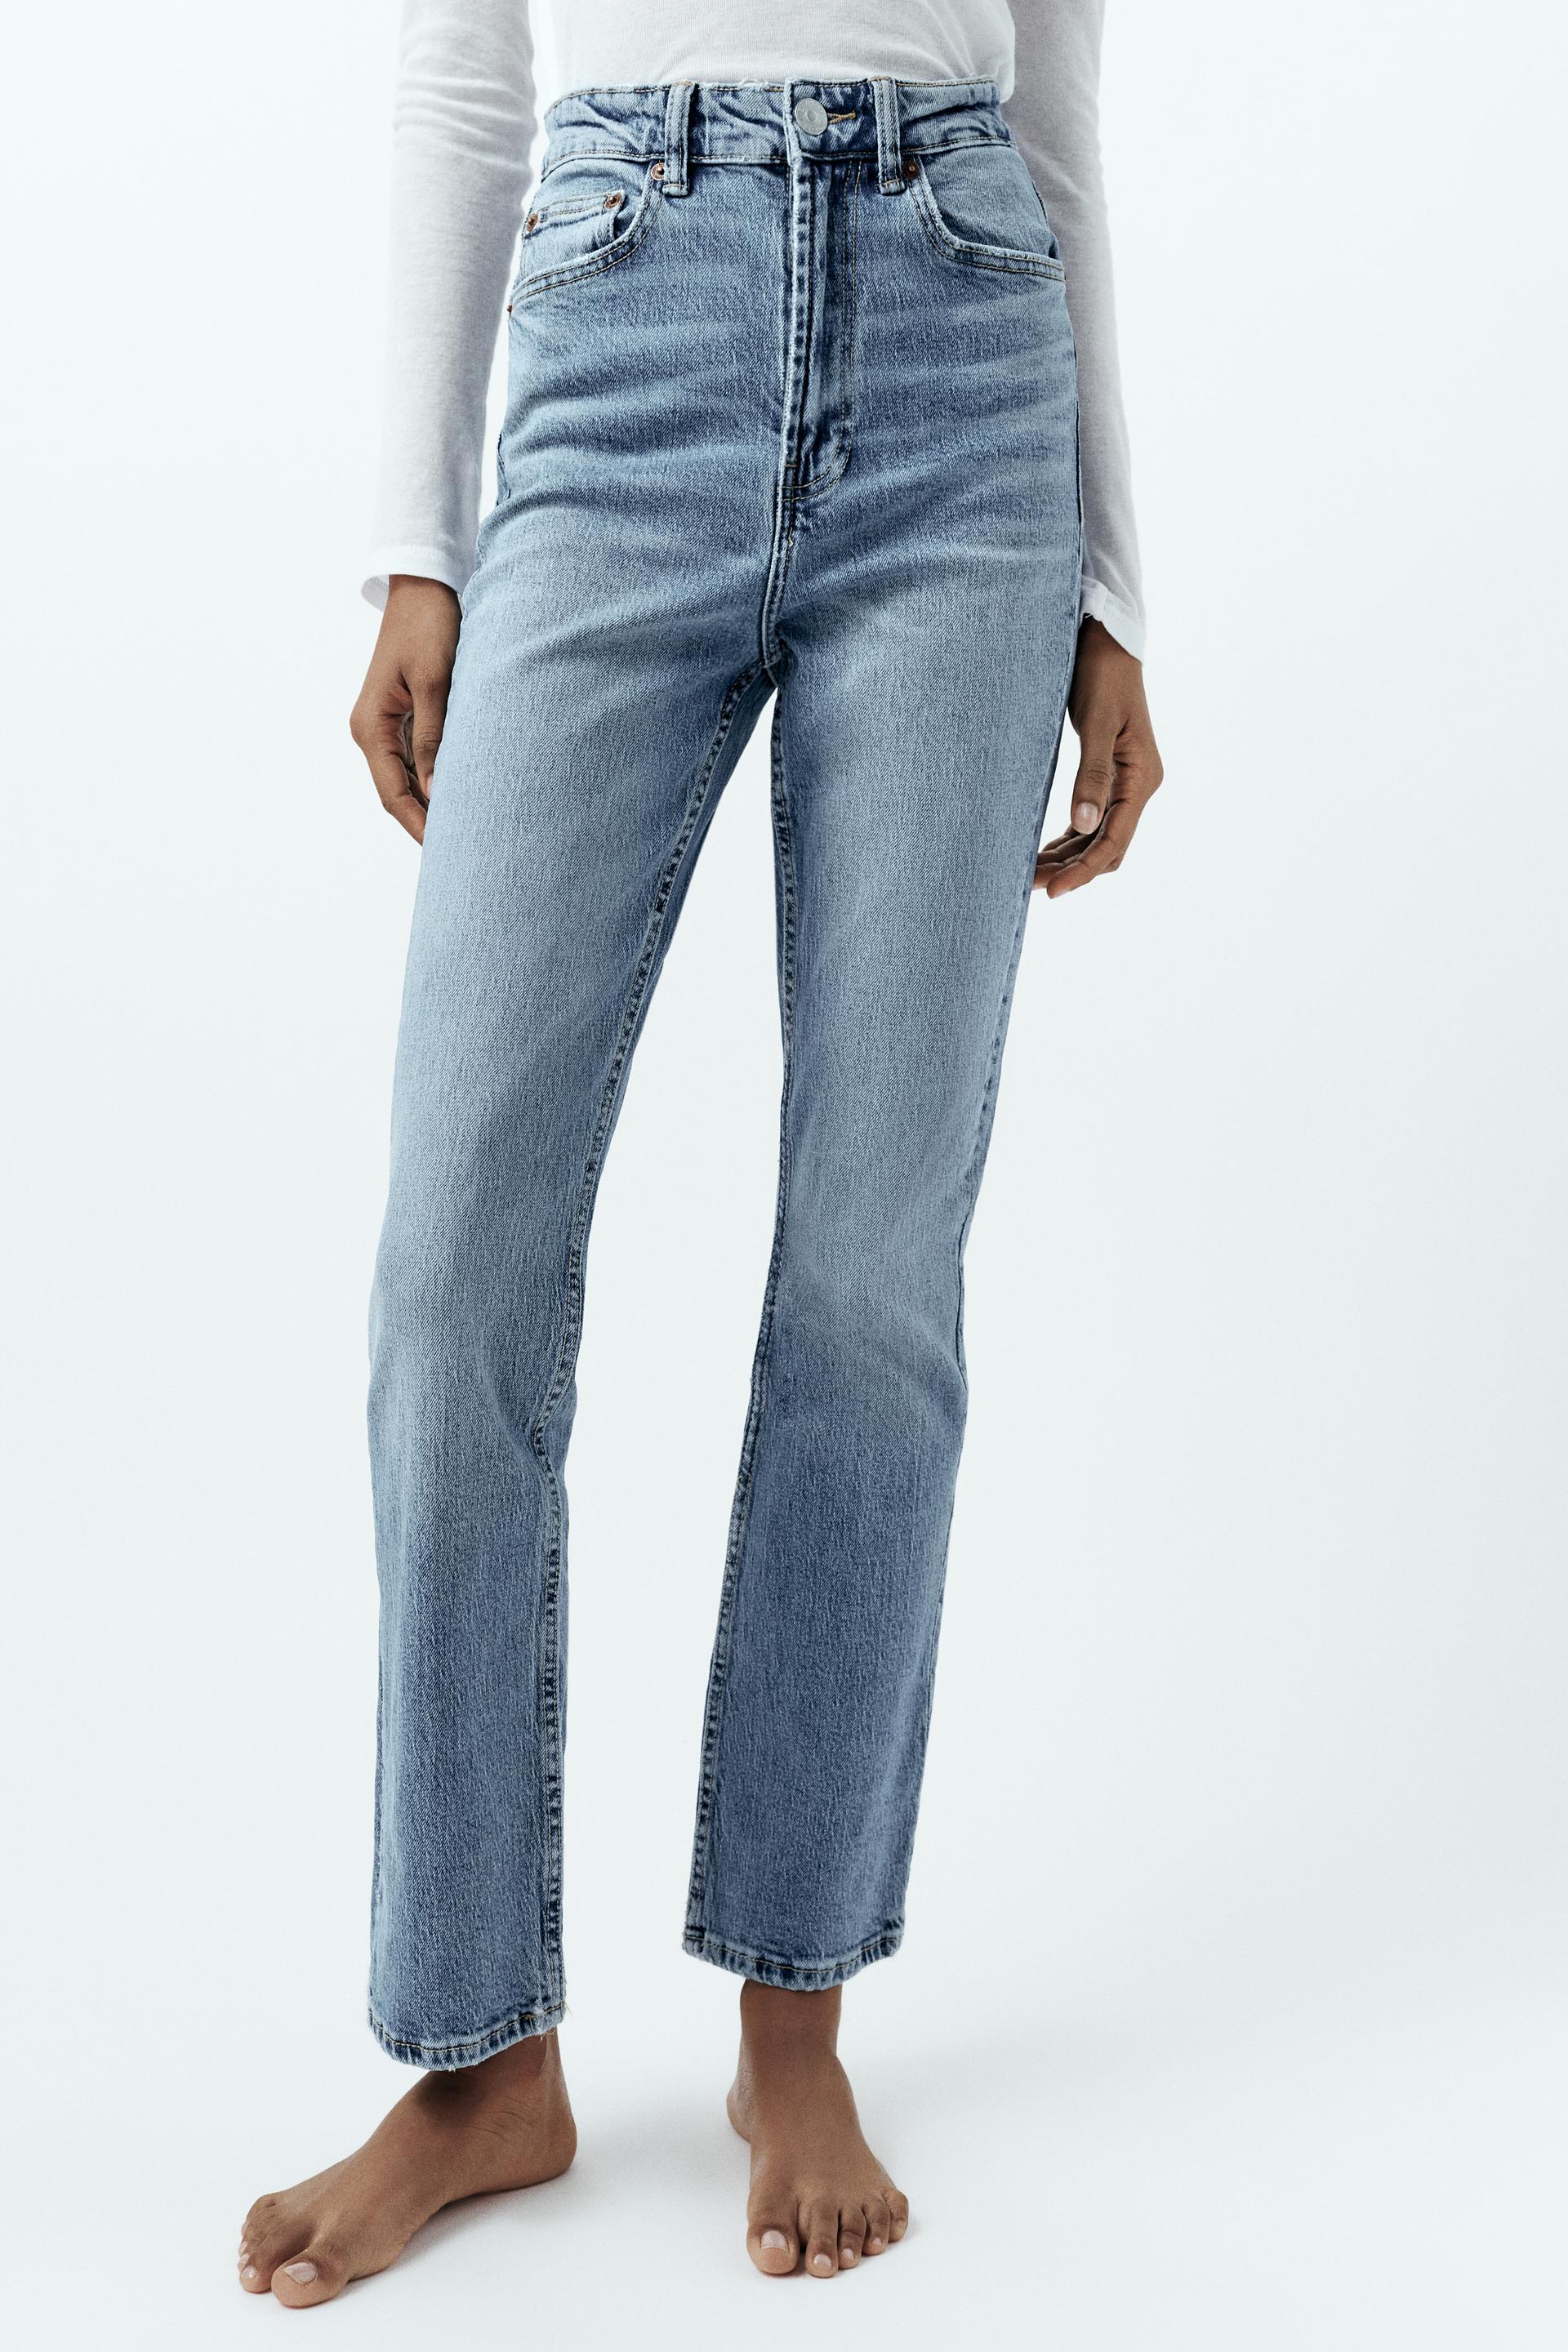 PANTS WITH A HIGH WAIST Navy Blue ZARA United States, 57% OFF